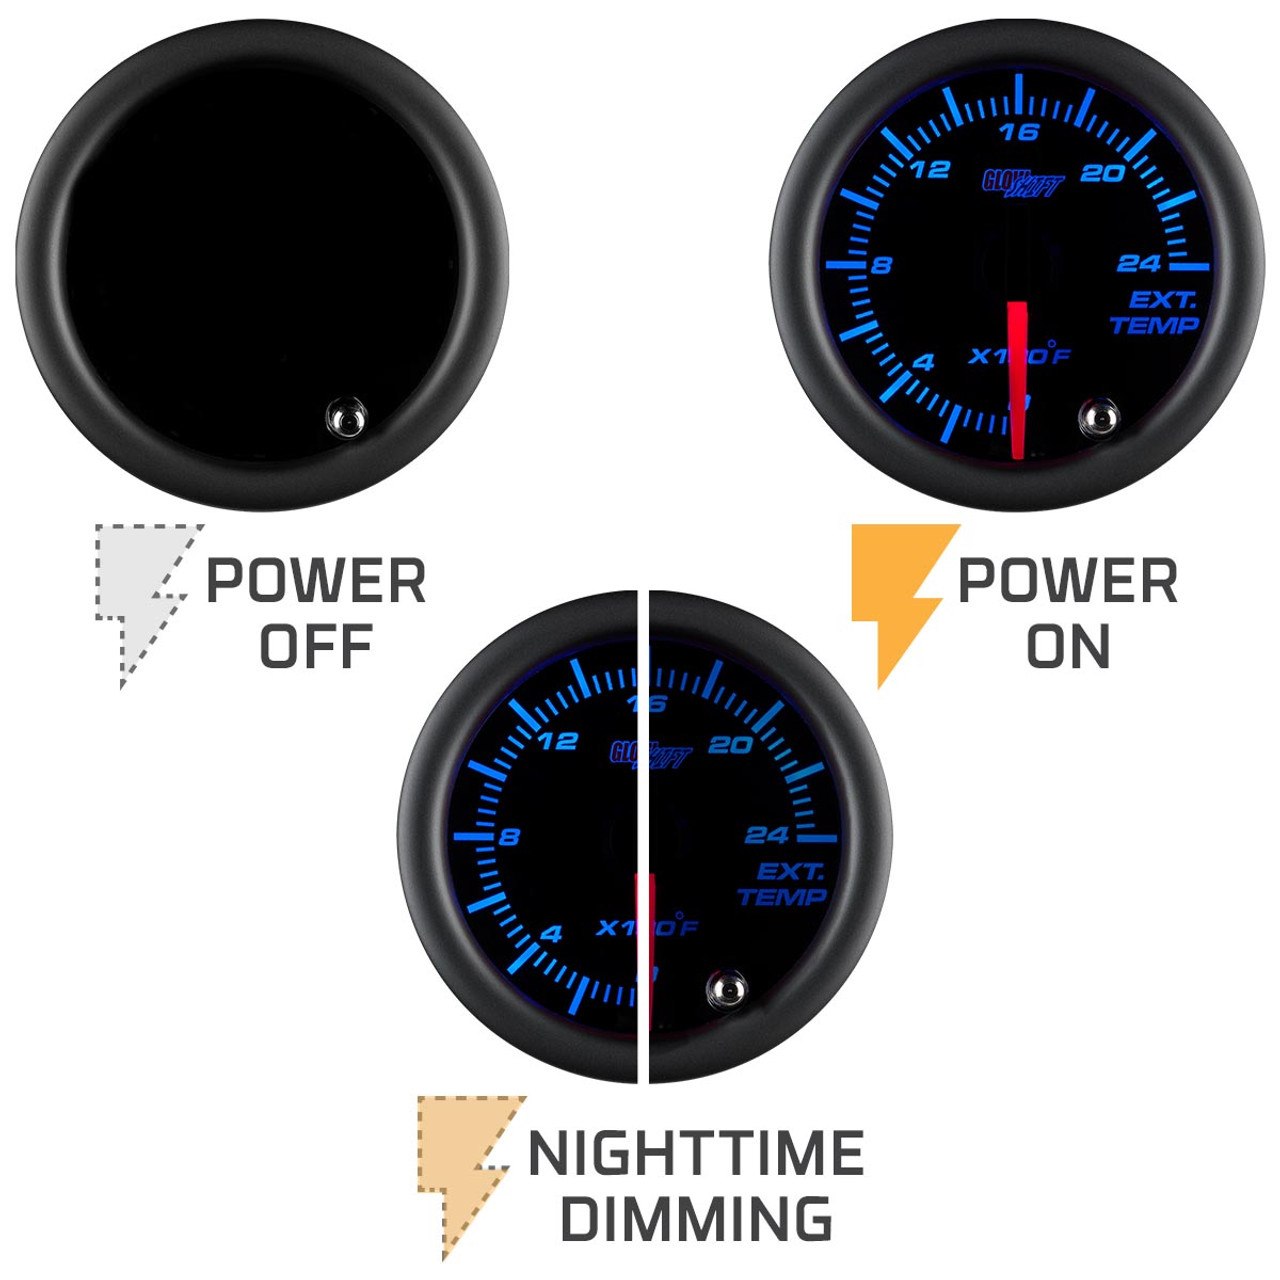 GlowShift Tinted Color 2400° F Exhaust Gas Temperature Gauge